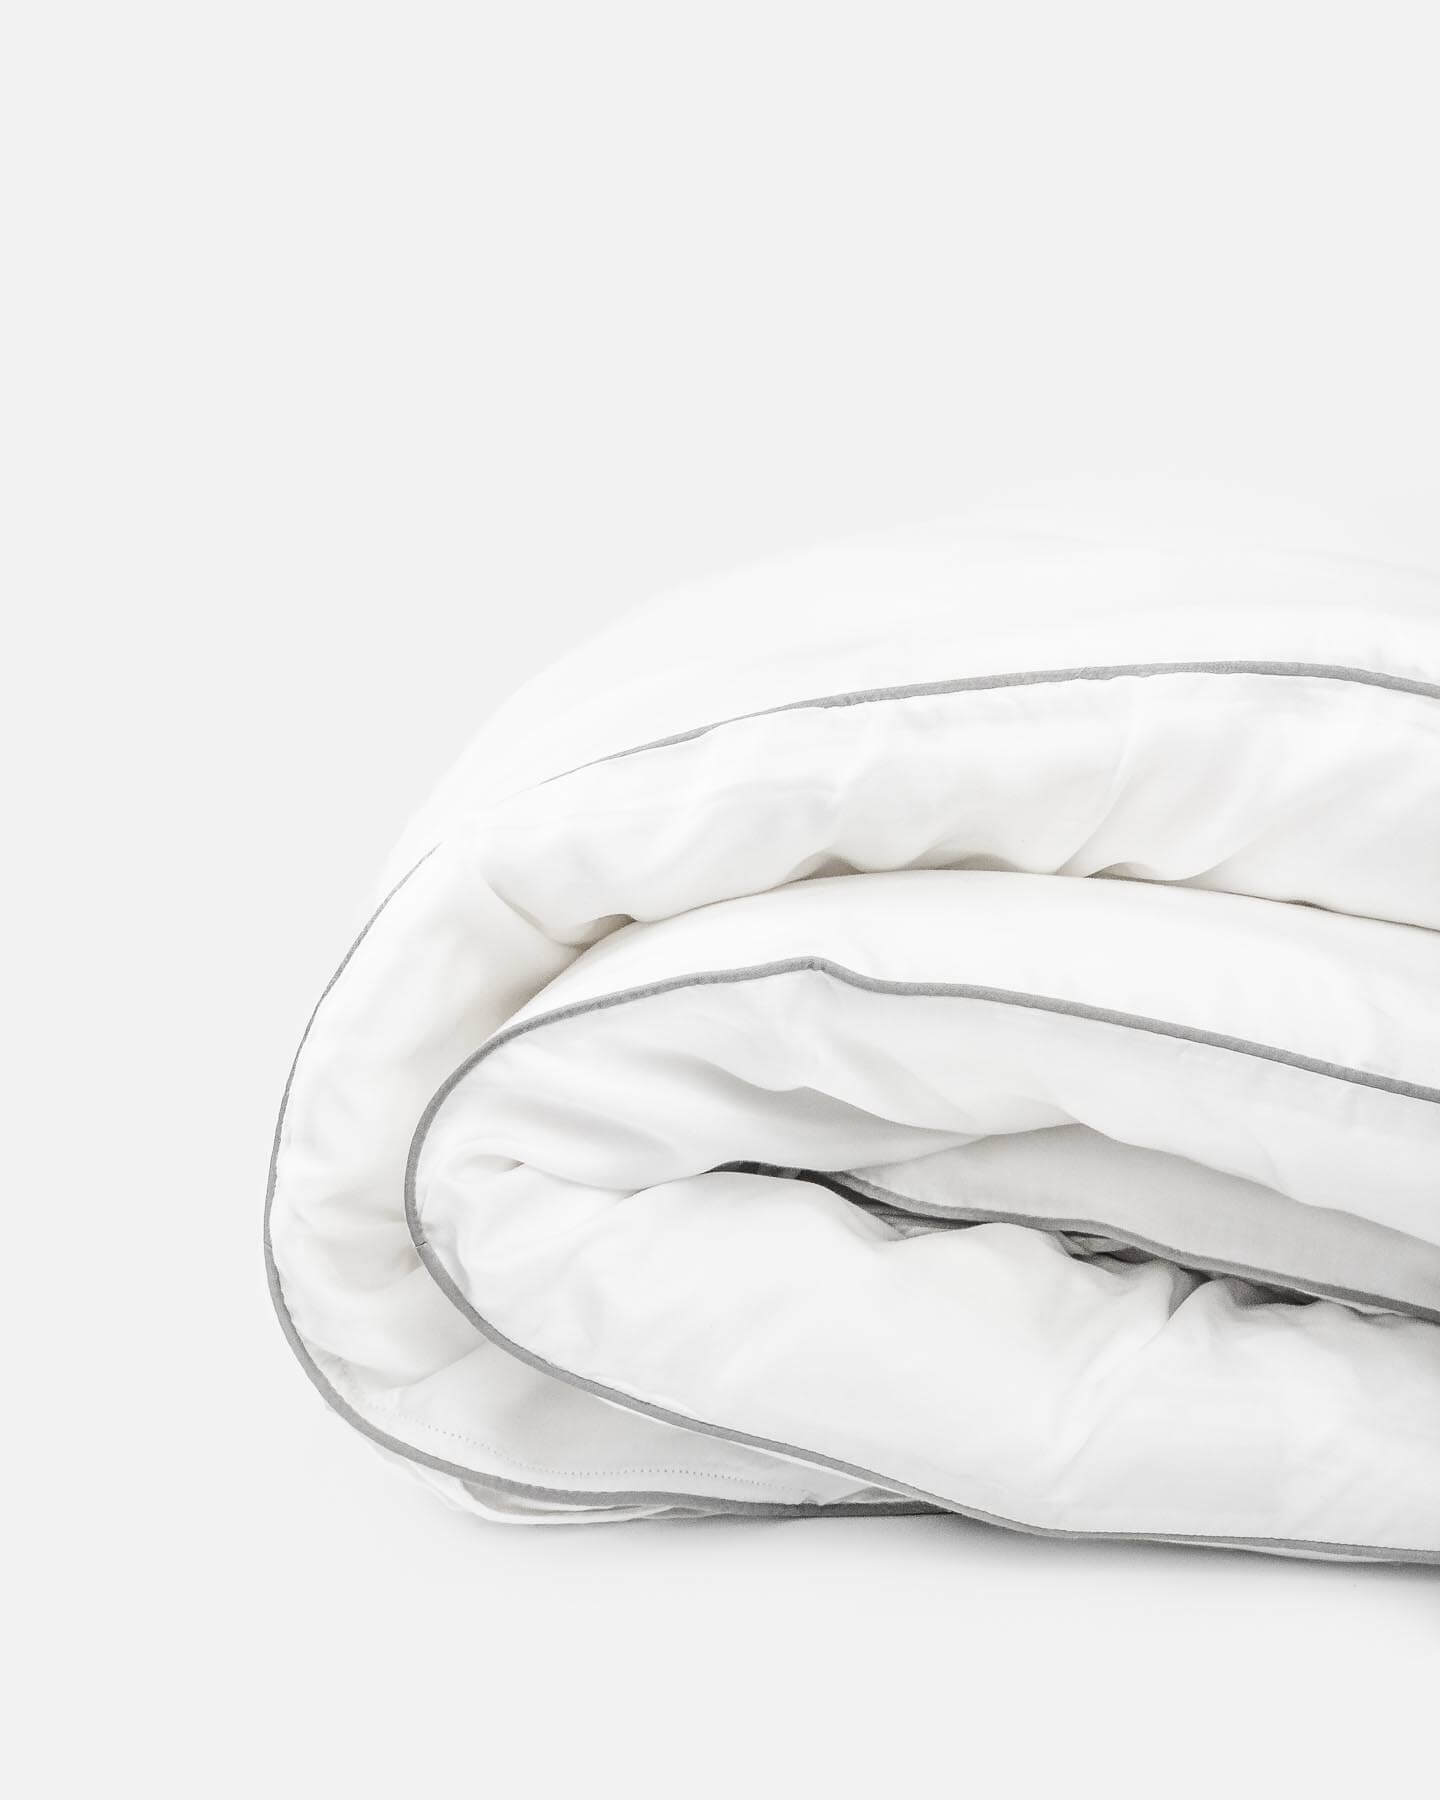 organic bamboo lyocell duvet cover rolled up side view in silver lining (white with gray piping). ava and ava ph soft and cooling bedding sheets.